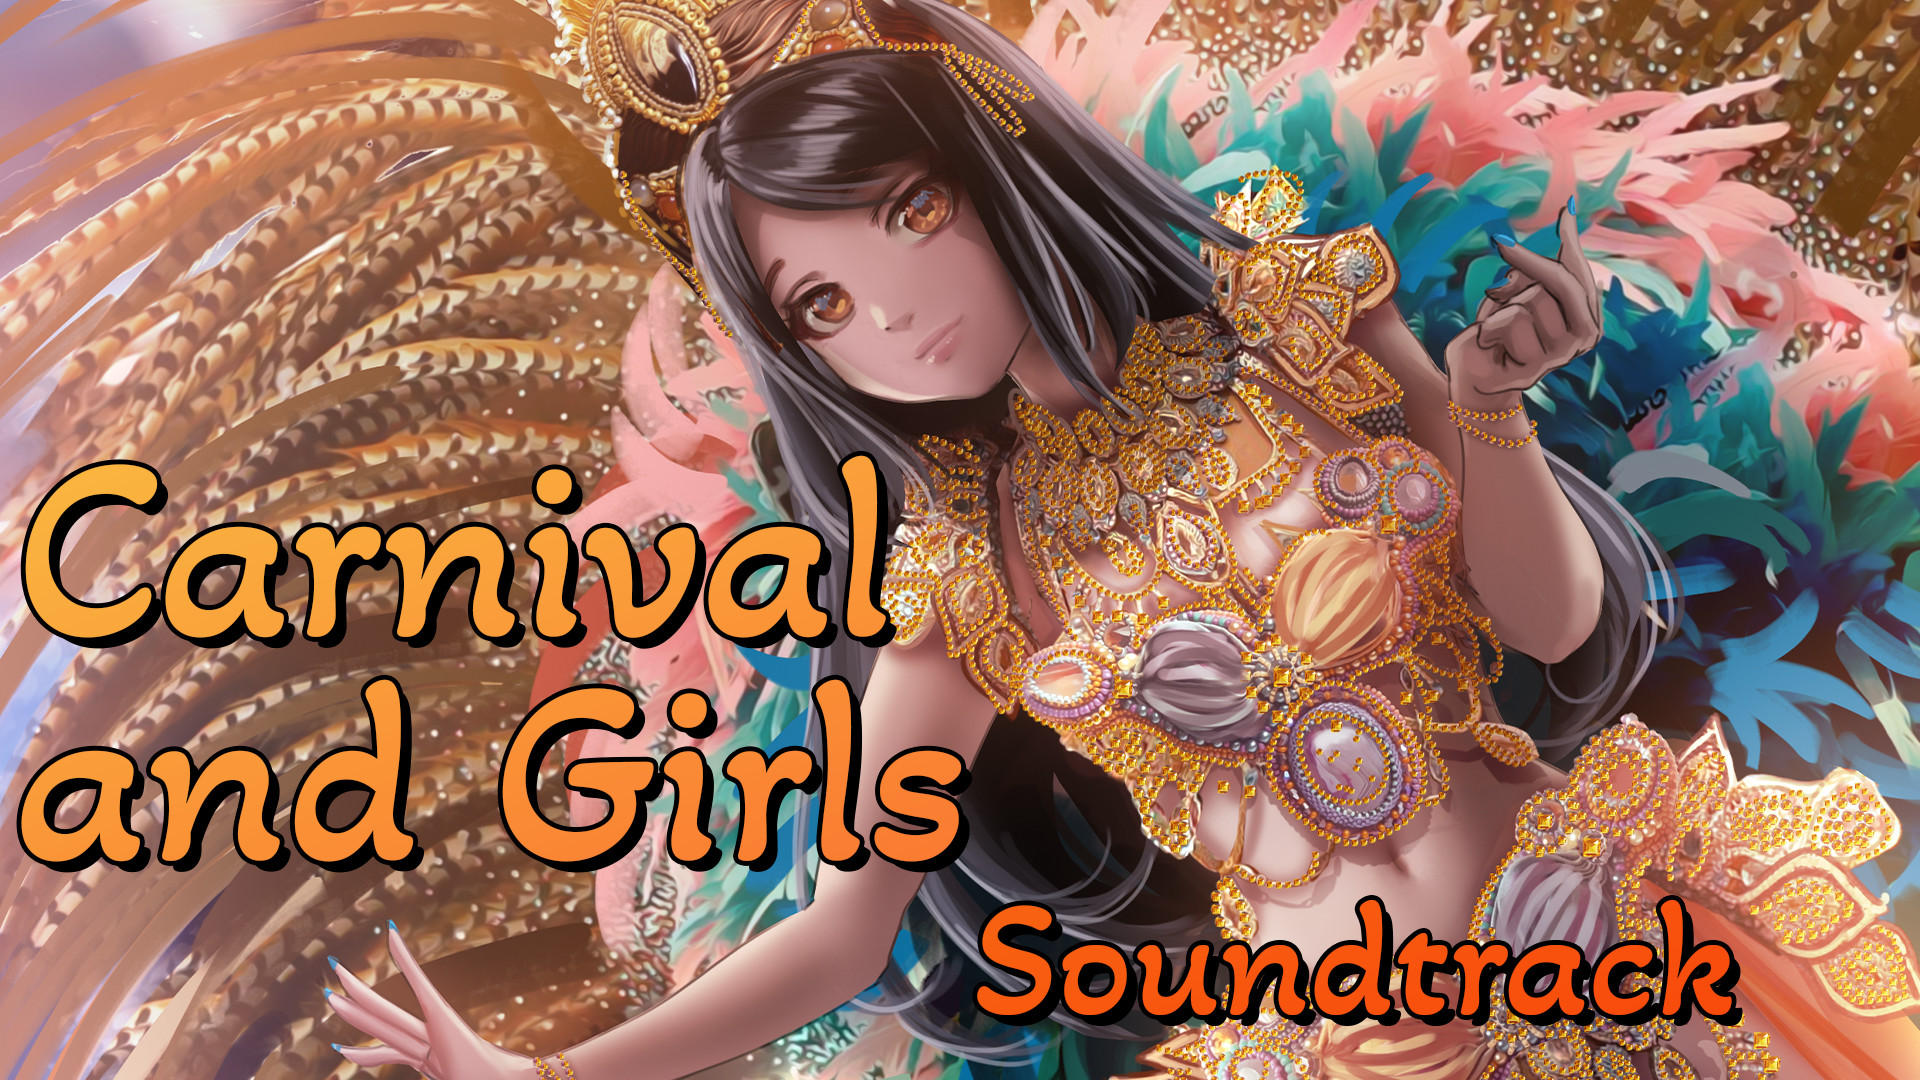 Carnival and Girls Soundtrack Featured Screenshot #1